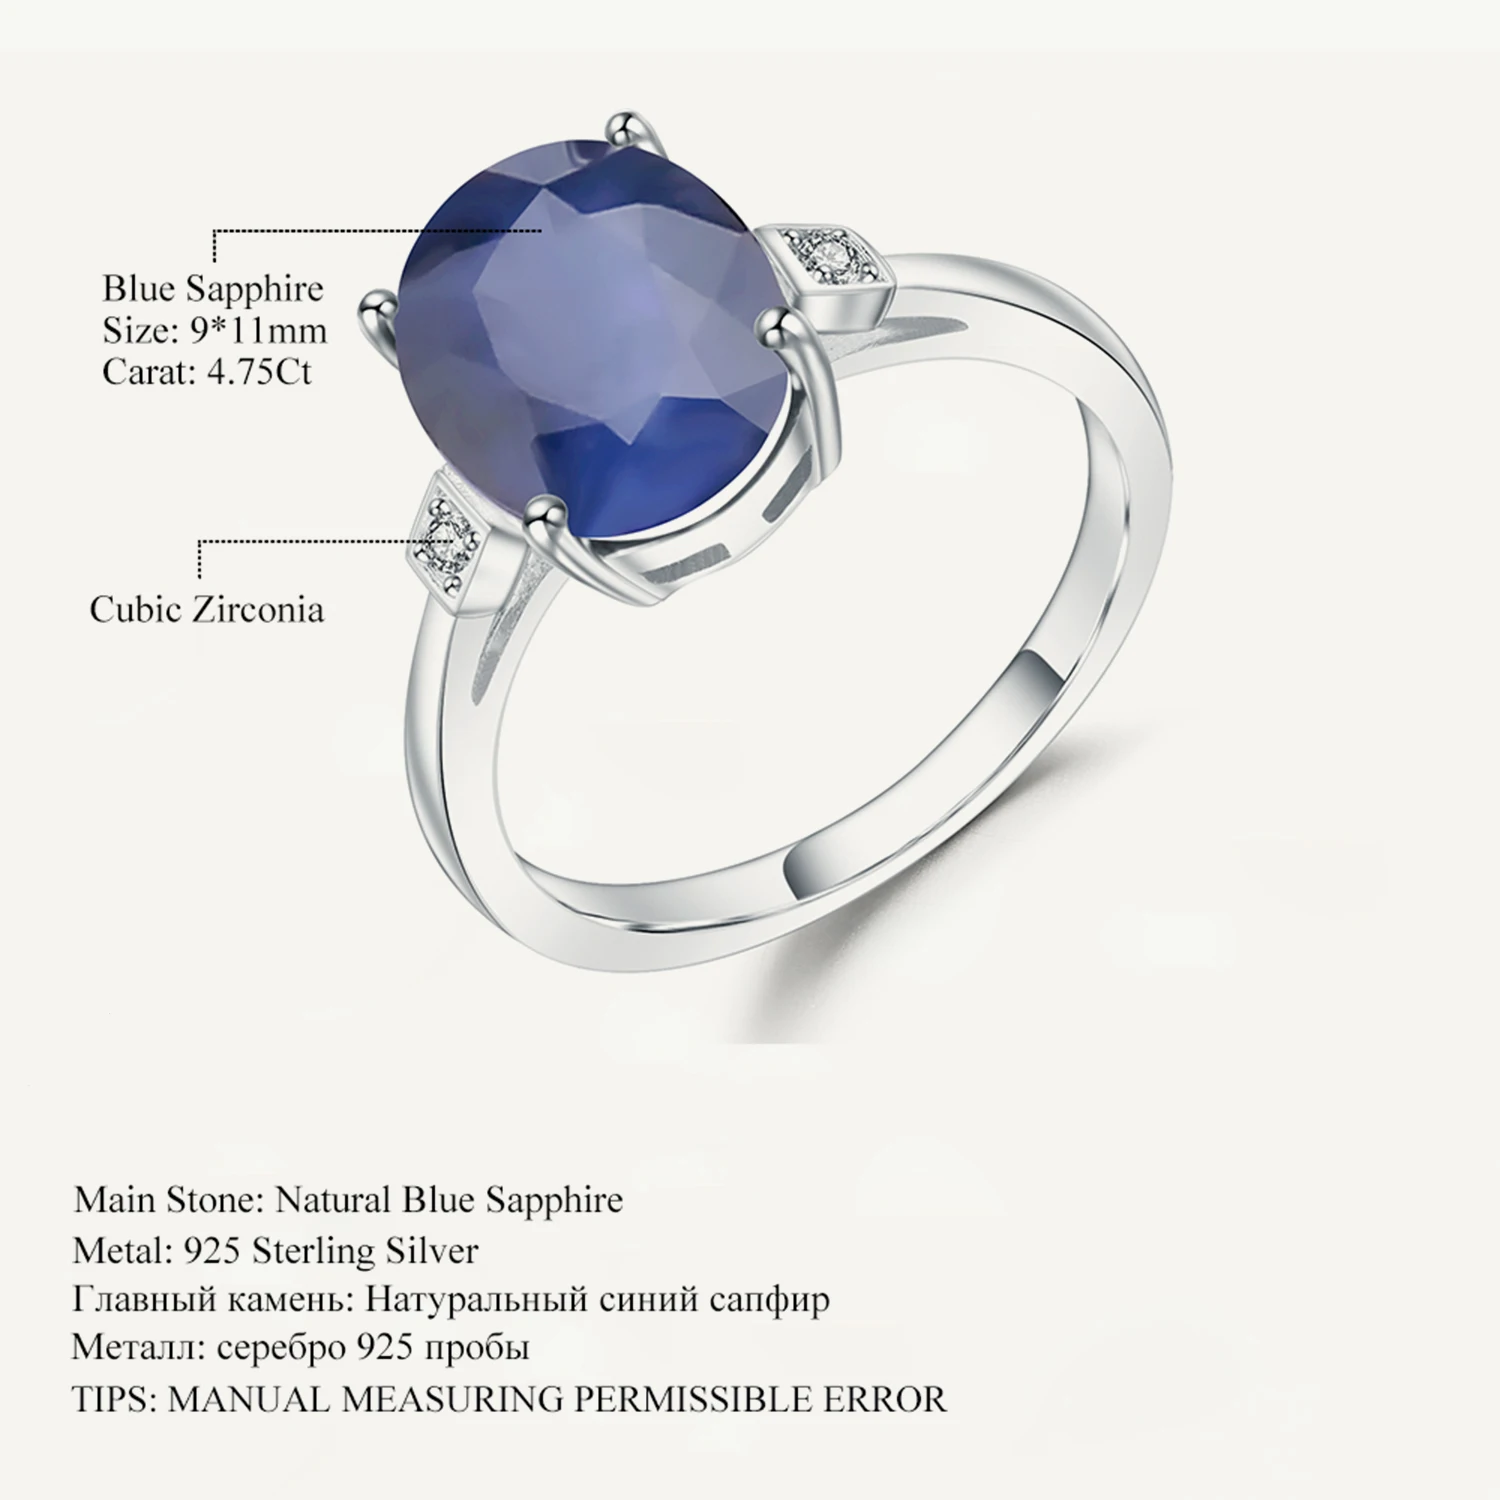 Llet 4 78ct oval natural blue sapphire gemstone ring 925 sterling silver simple wedding thumb200